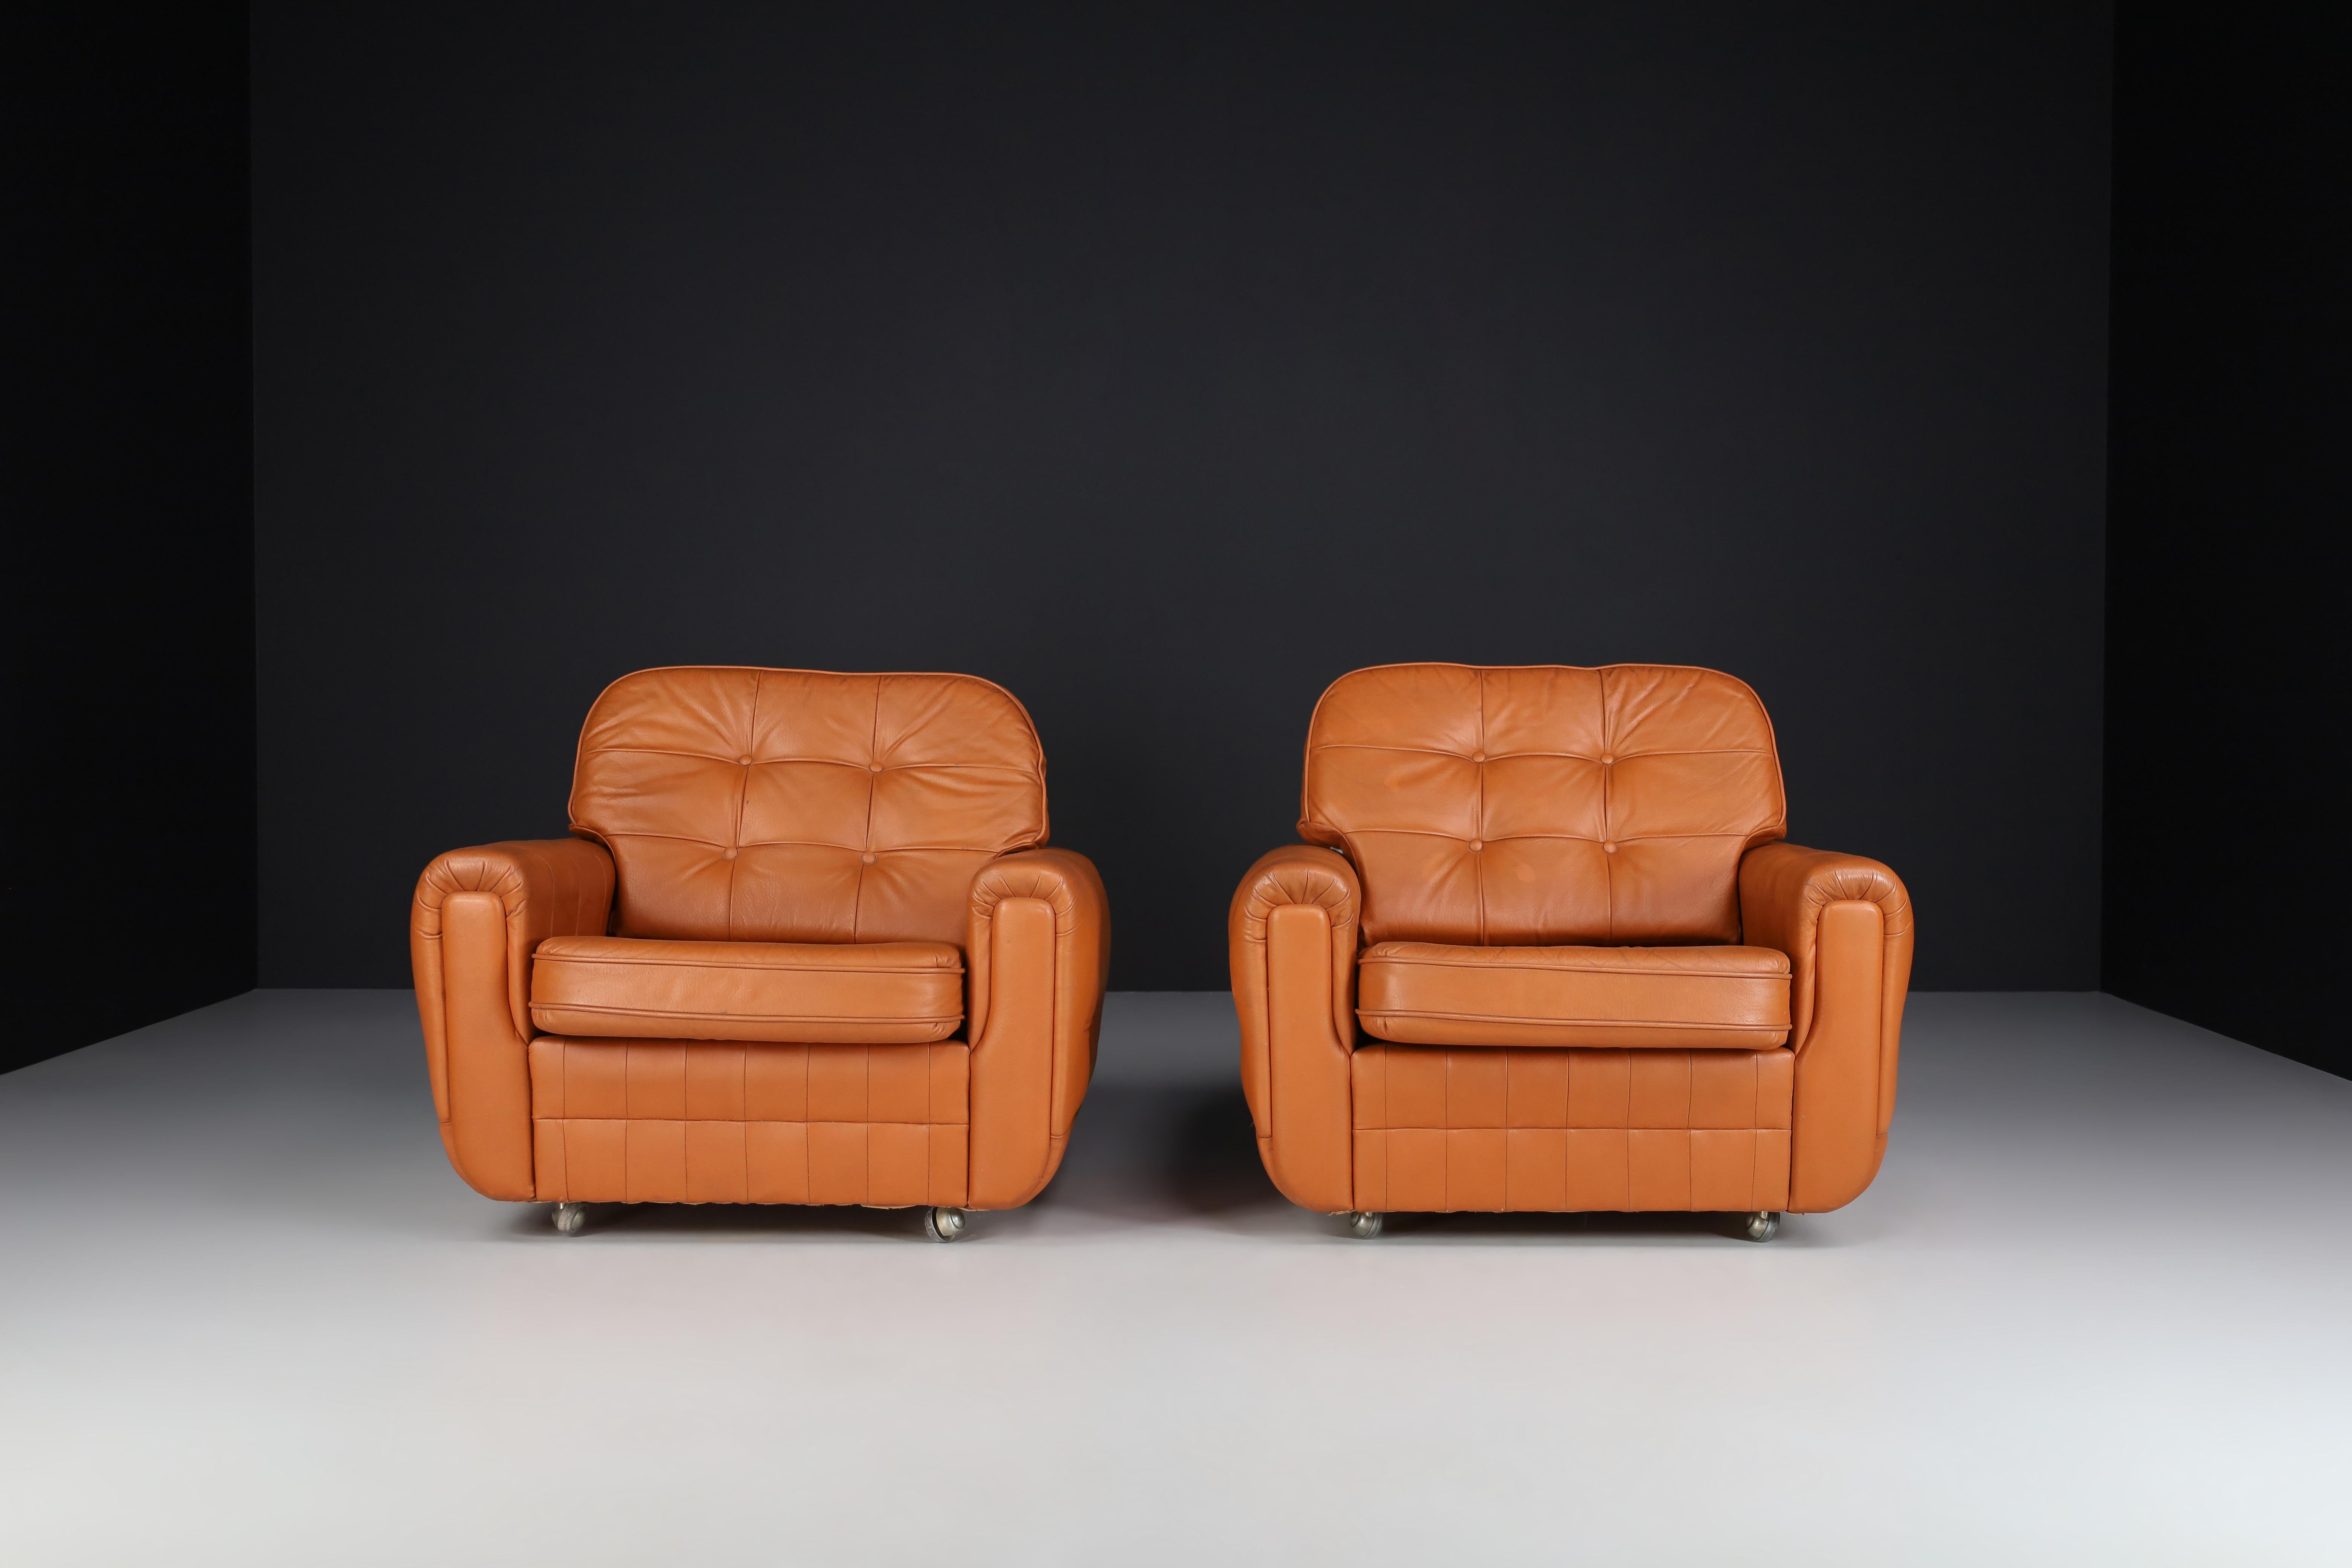 Mid-century leather armchairs manufactured and designed in France 1960s. It is in perfect vintage condition, minor patina on leather parts. These amazing lounge chairs would make an eye-catching addition to any interior such as living room, family